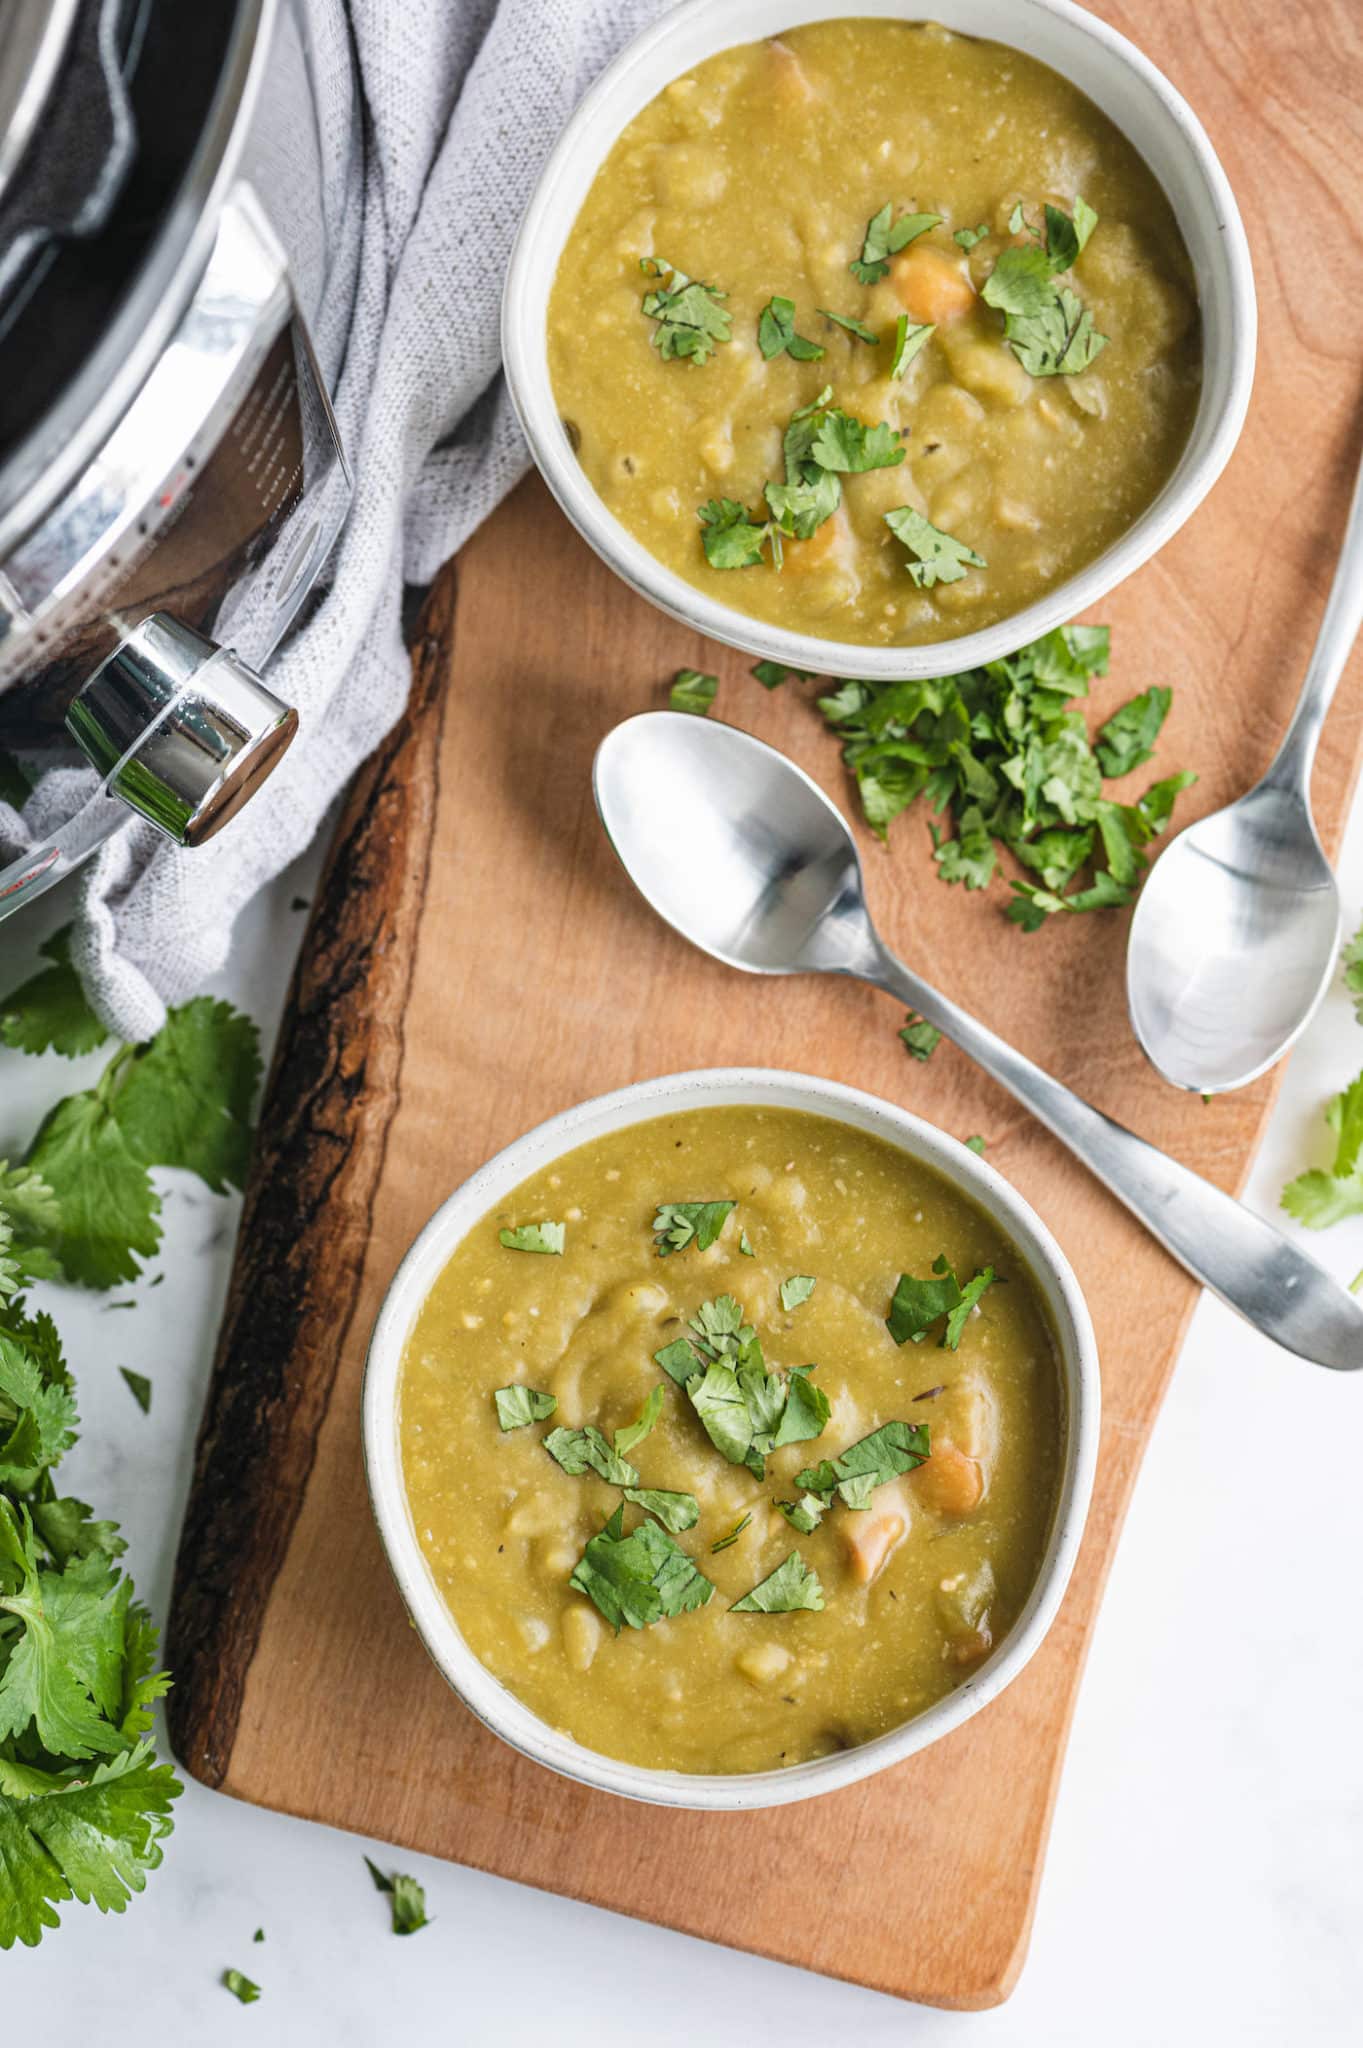 https://www.cleaneatingkitchen.com/wp-content/uploads/2022/04/instant-pot-split-pea-soup-two-bowls-scaled.jpg